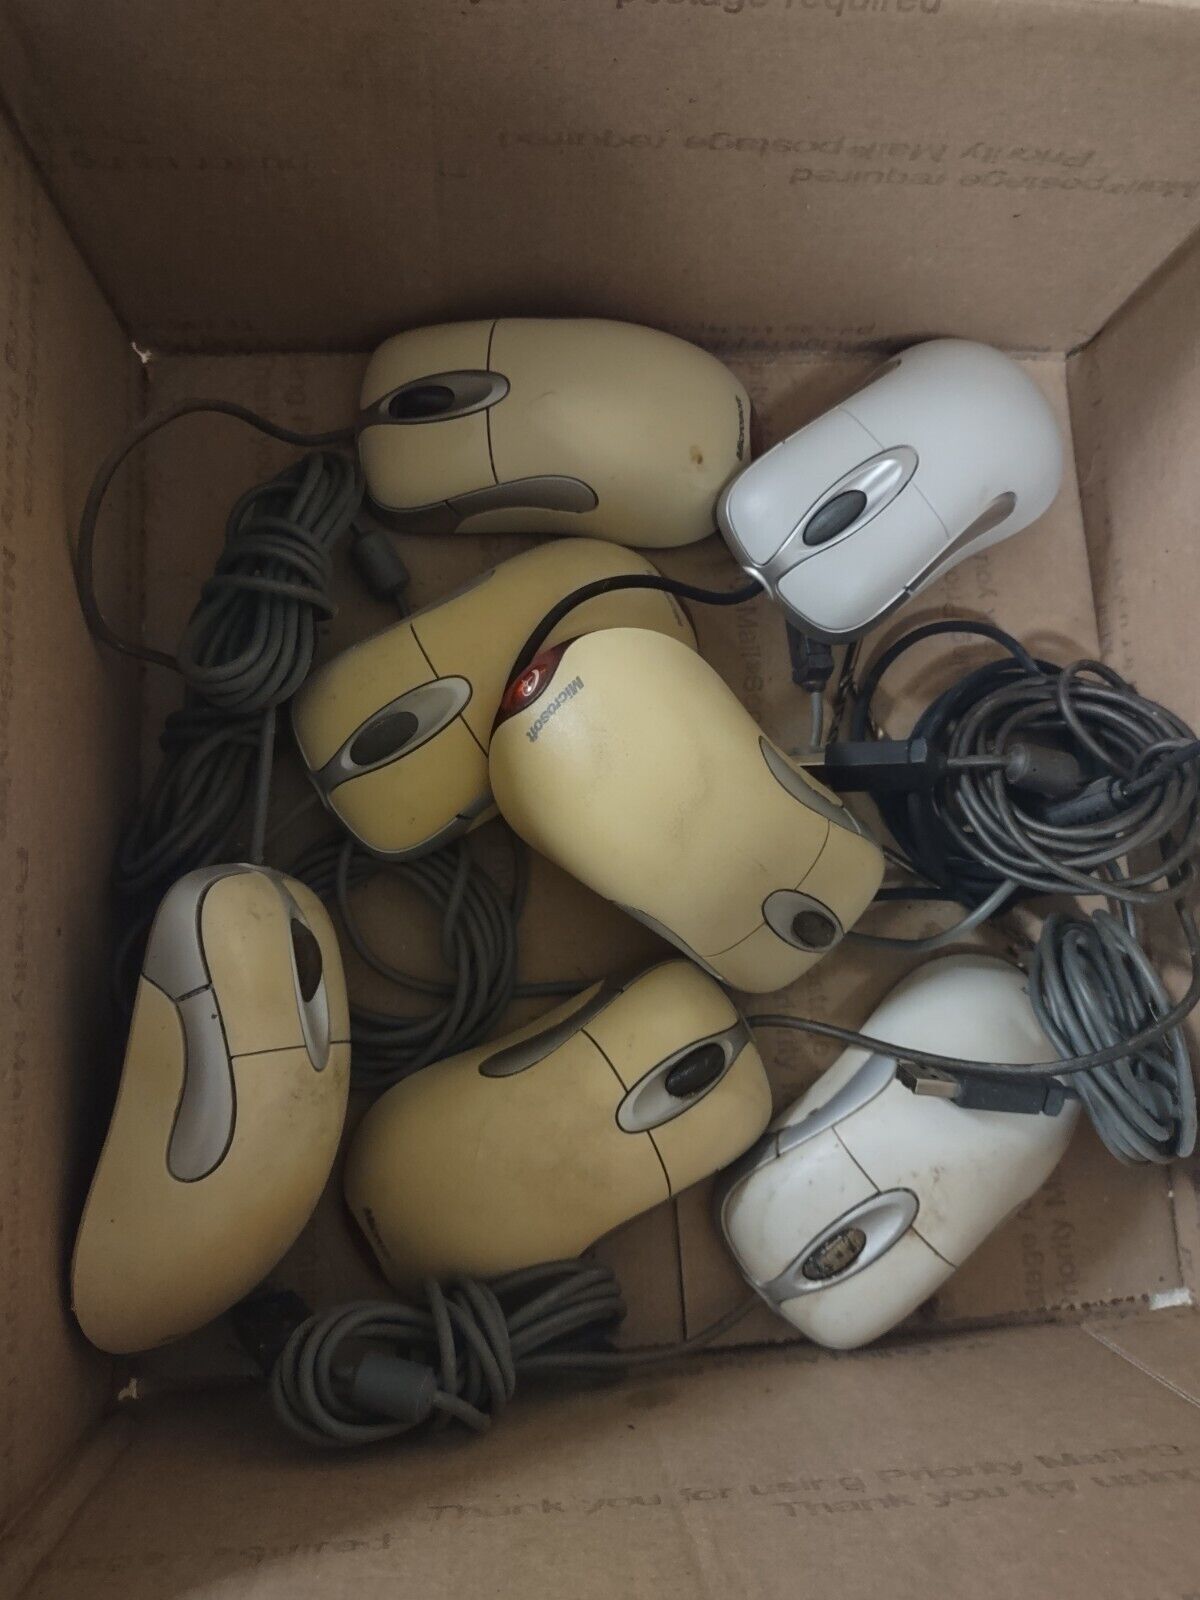 Microsoft Intellimouse Optical USB Lot of 7 fast shipment BUY IT NOW